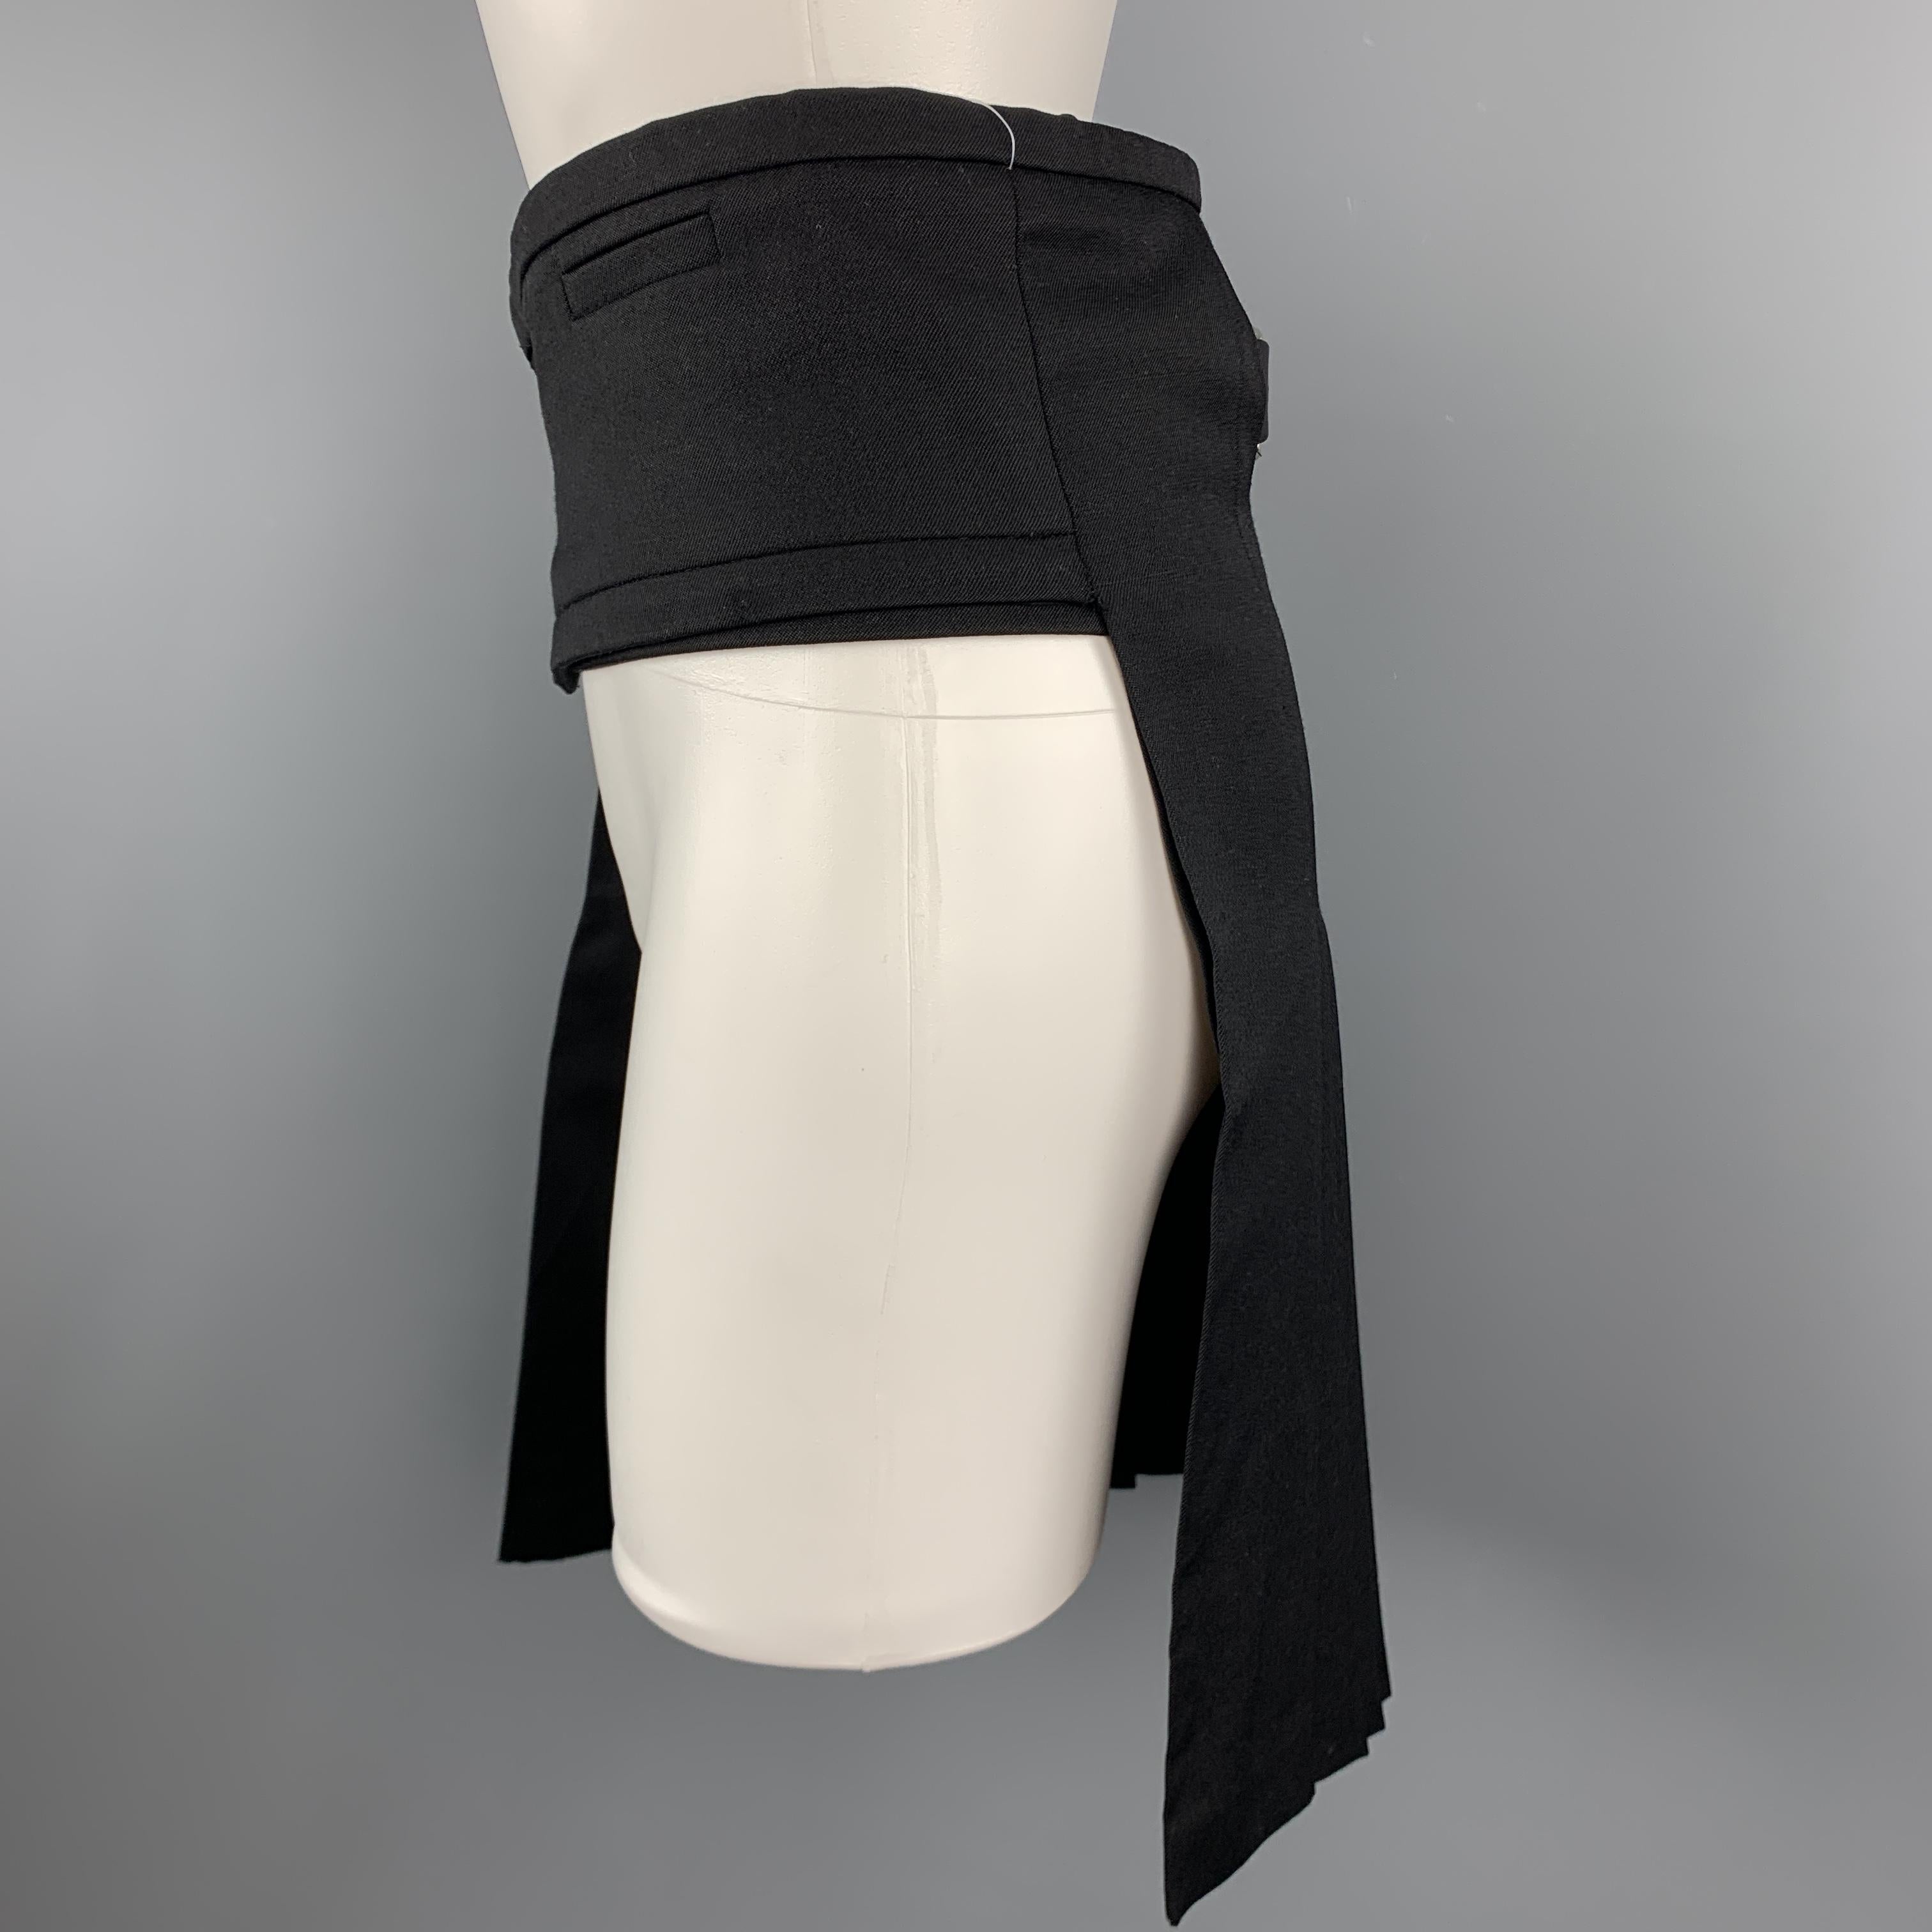 JOHN BARTLETT skirt comes in black wool twill with a wrap waistband, belt closures, and cutout panel. Made in Italy.

Excellent Pre-Owned Condition.
Marked: IT 46

Measurements:

Waist: 29 in.
Hip: 34 in.
Length: 21 in.